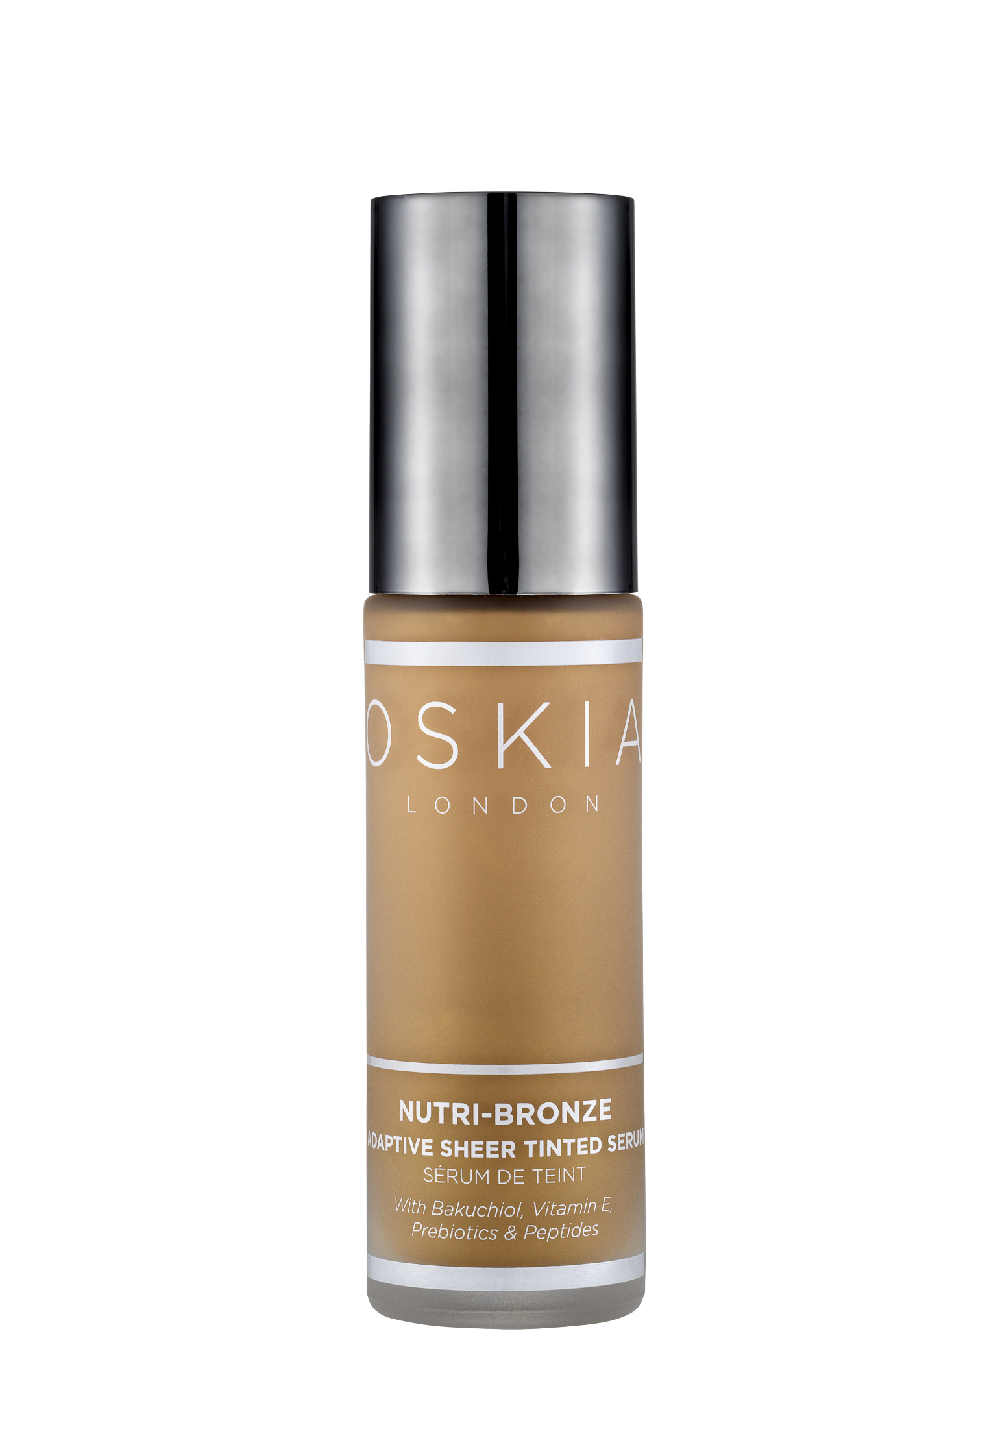 NUTRI-BRONZE Sheer Tinted Serum Bottle for a healthy glow